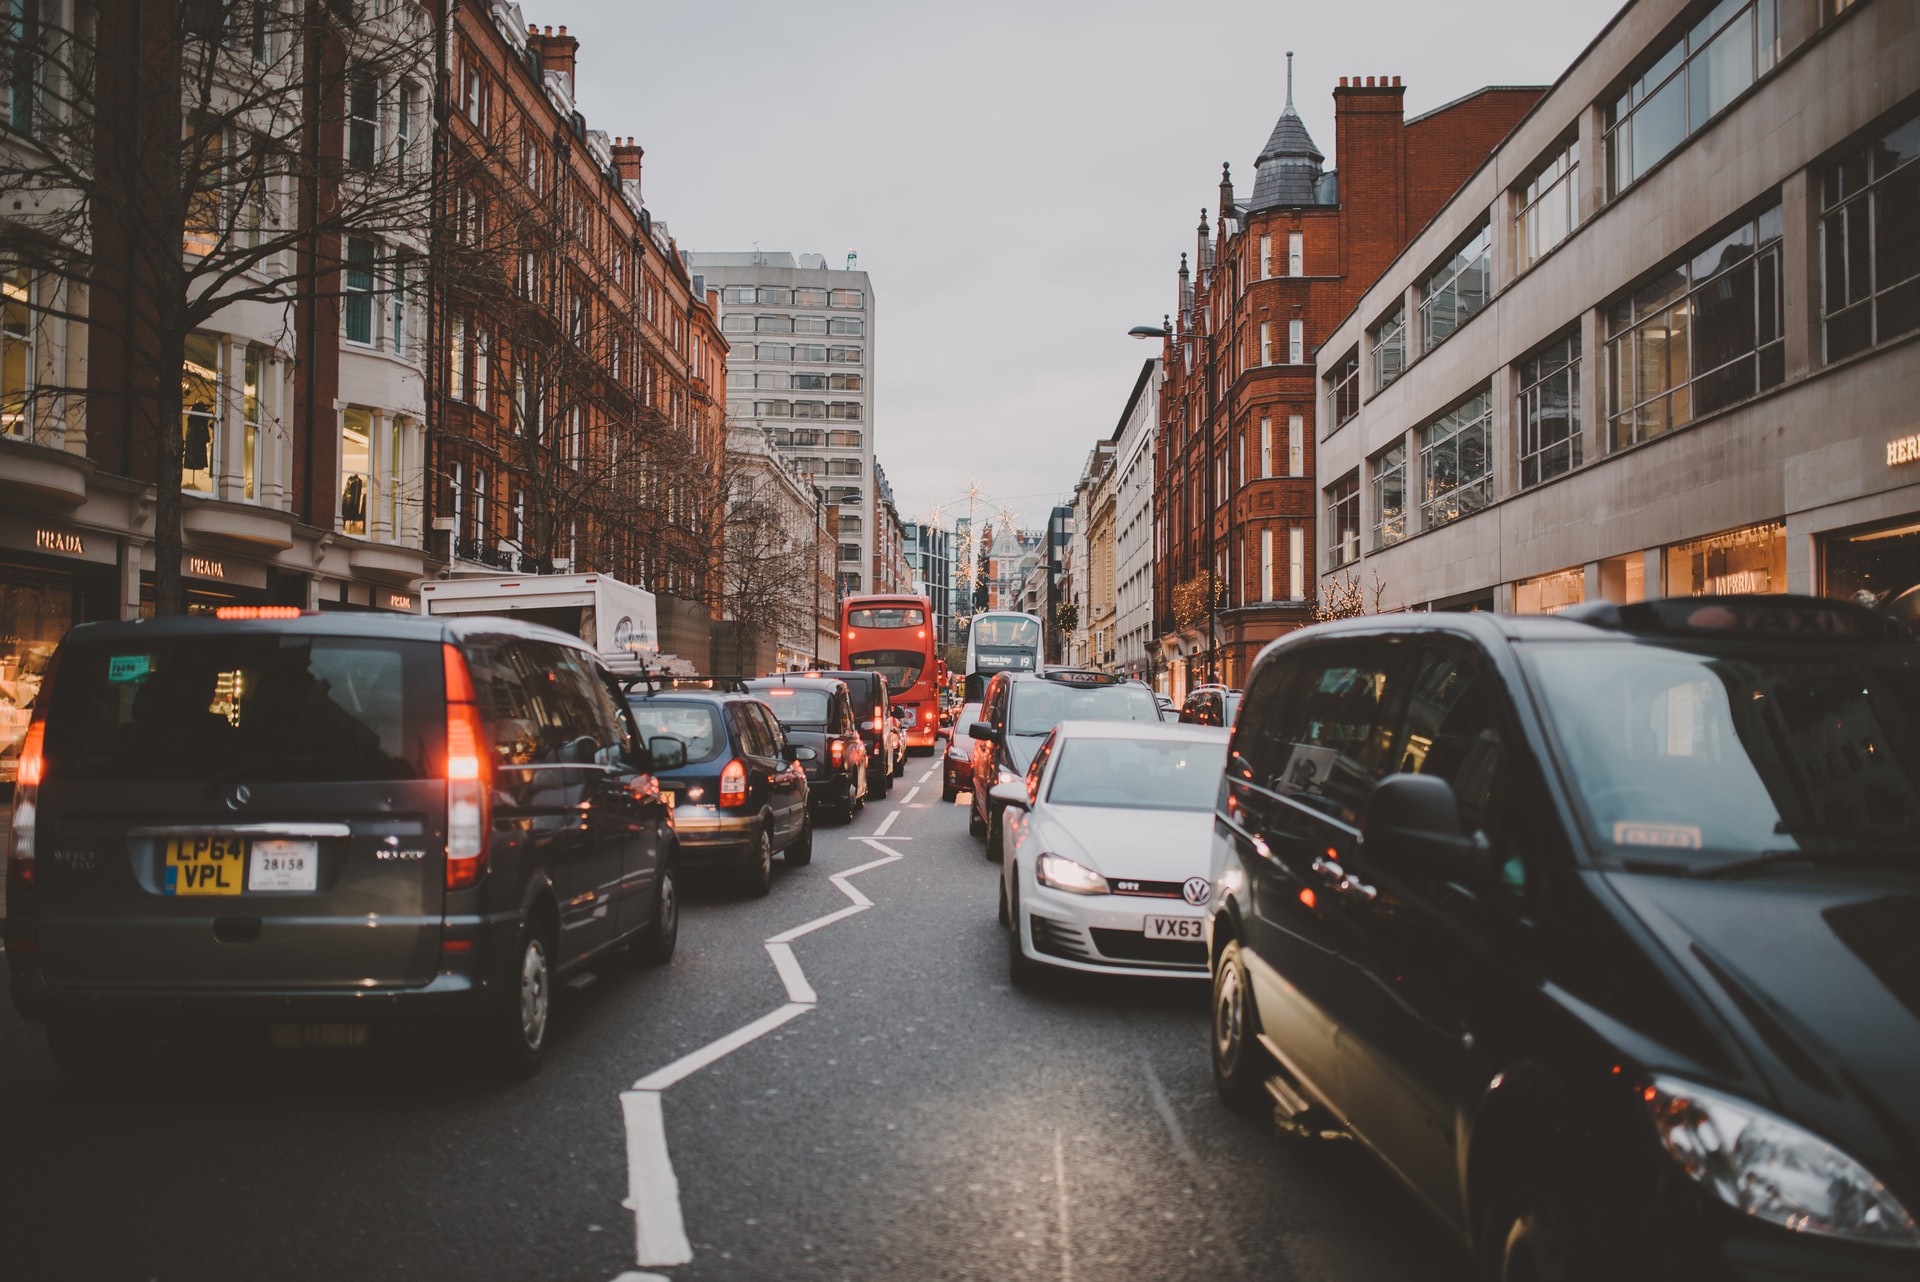 Heavy traffic in London. Cars are a major source of CO2 emissions in the UK